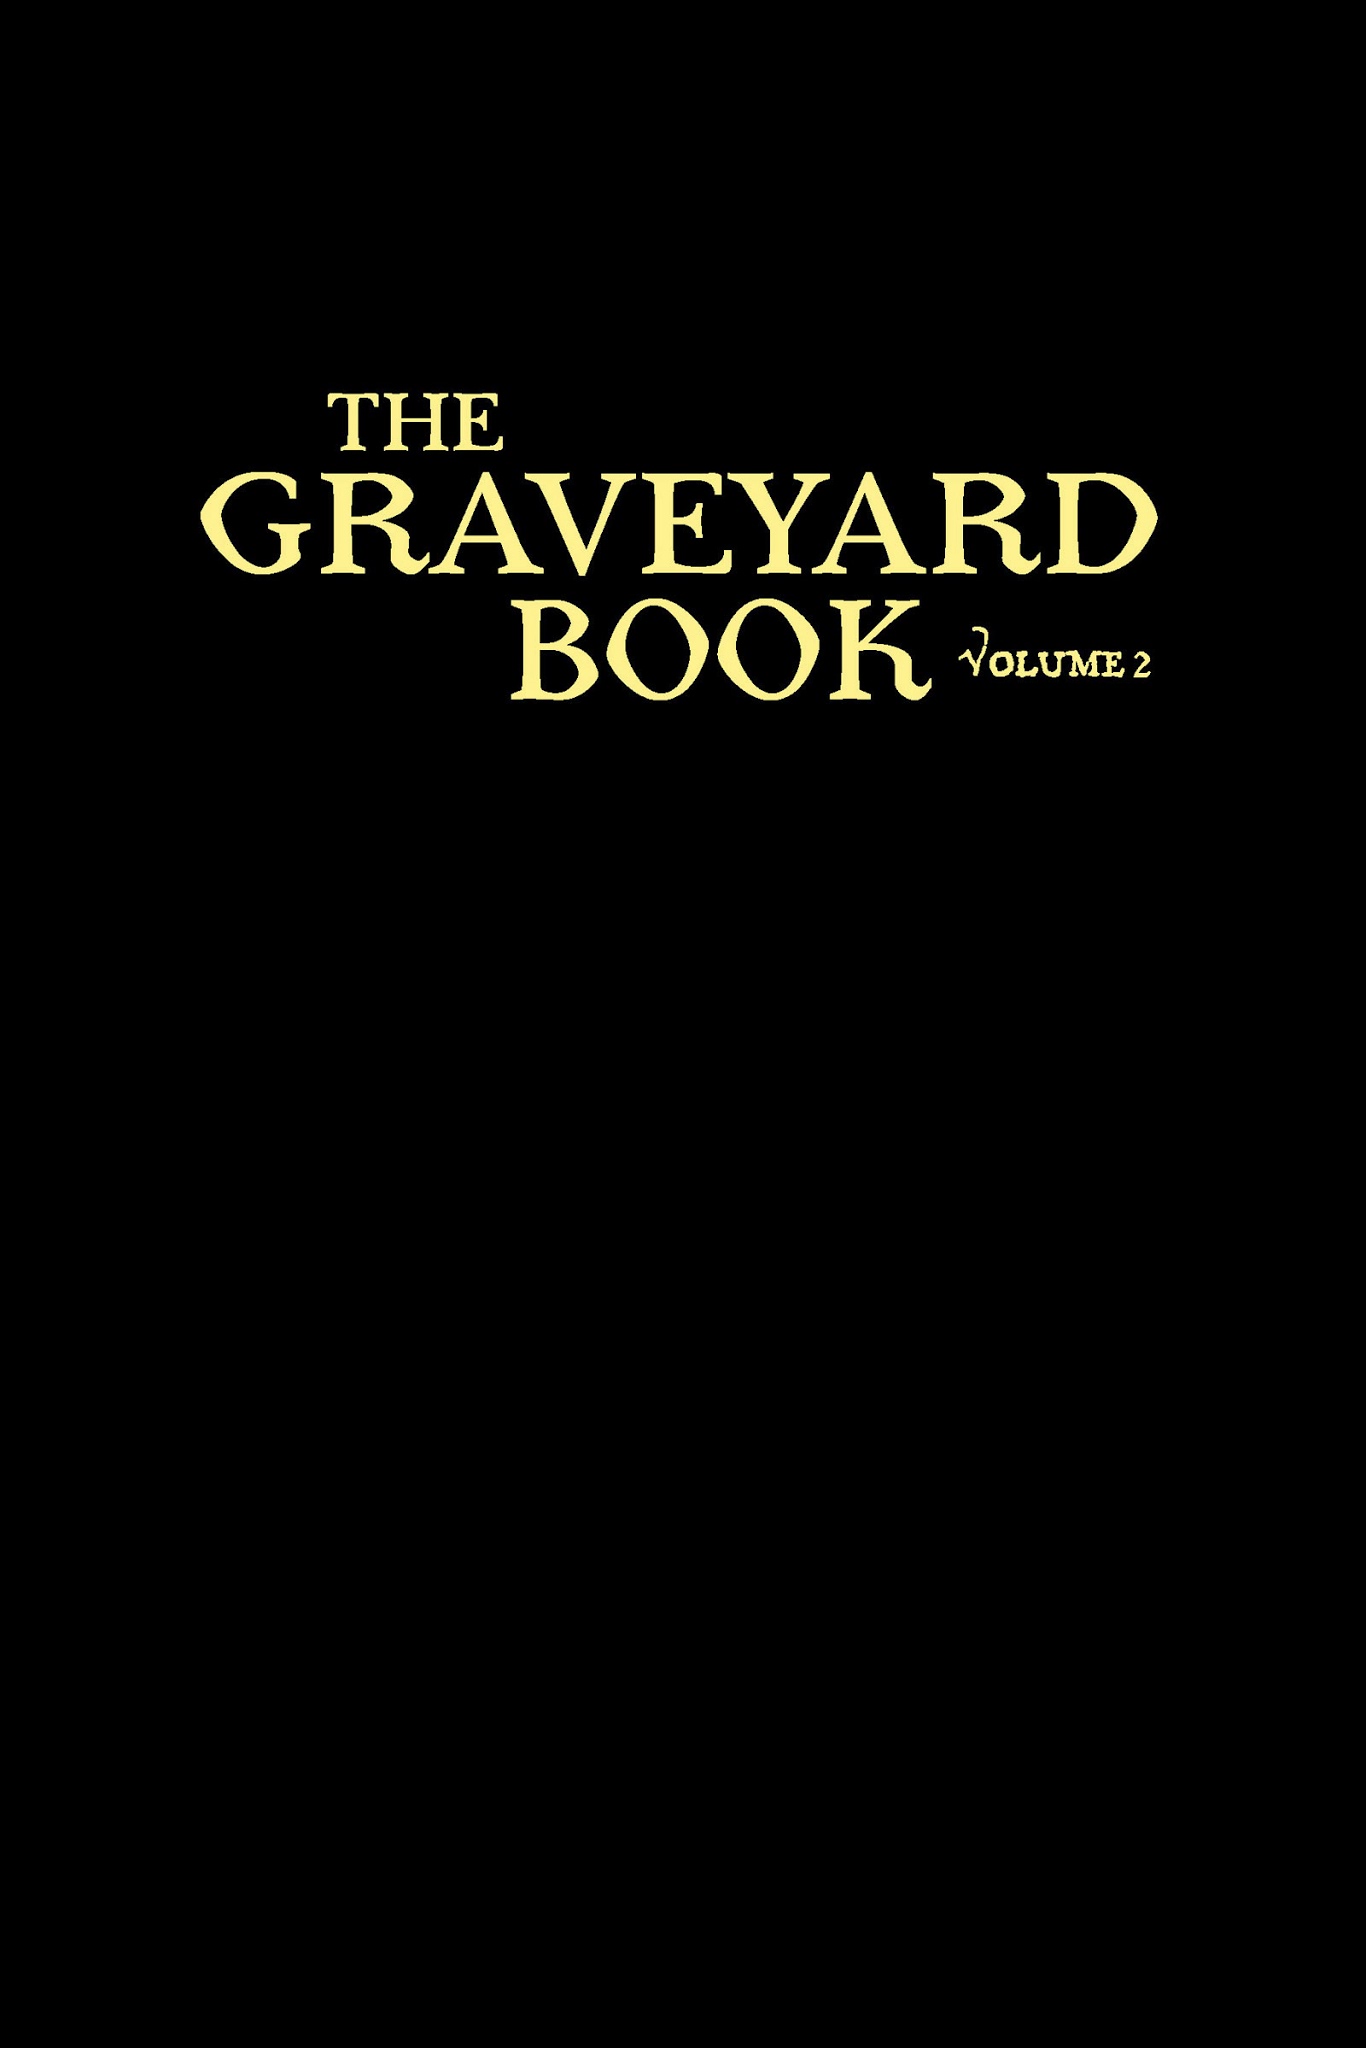 Read online The Graveyard Book: Graphic Novel comic -  Issue # TPB 2 - 2